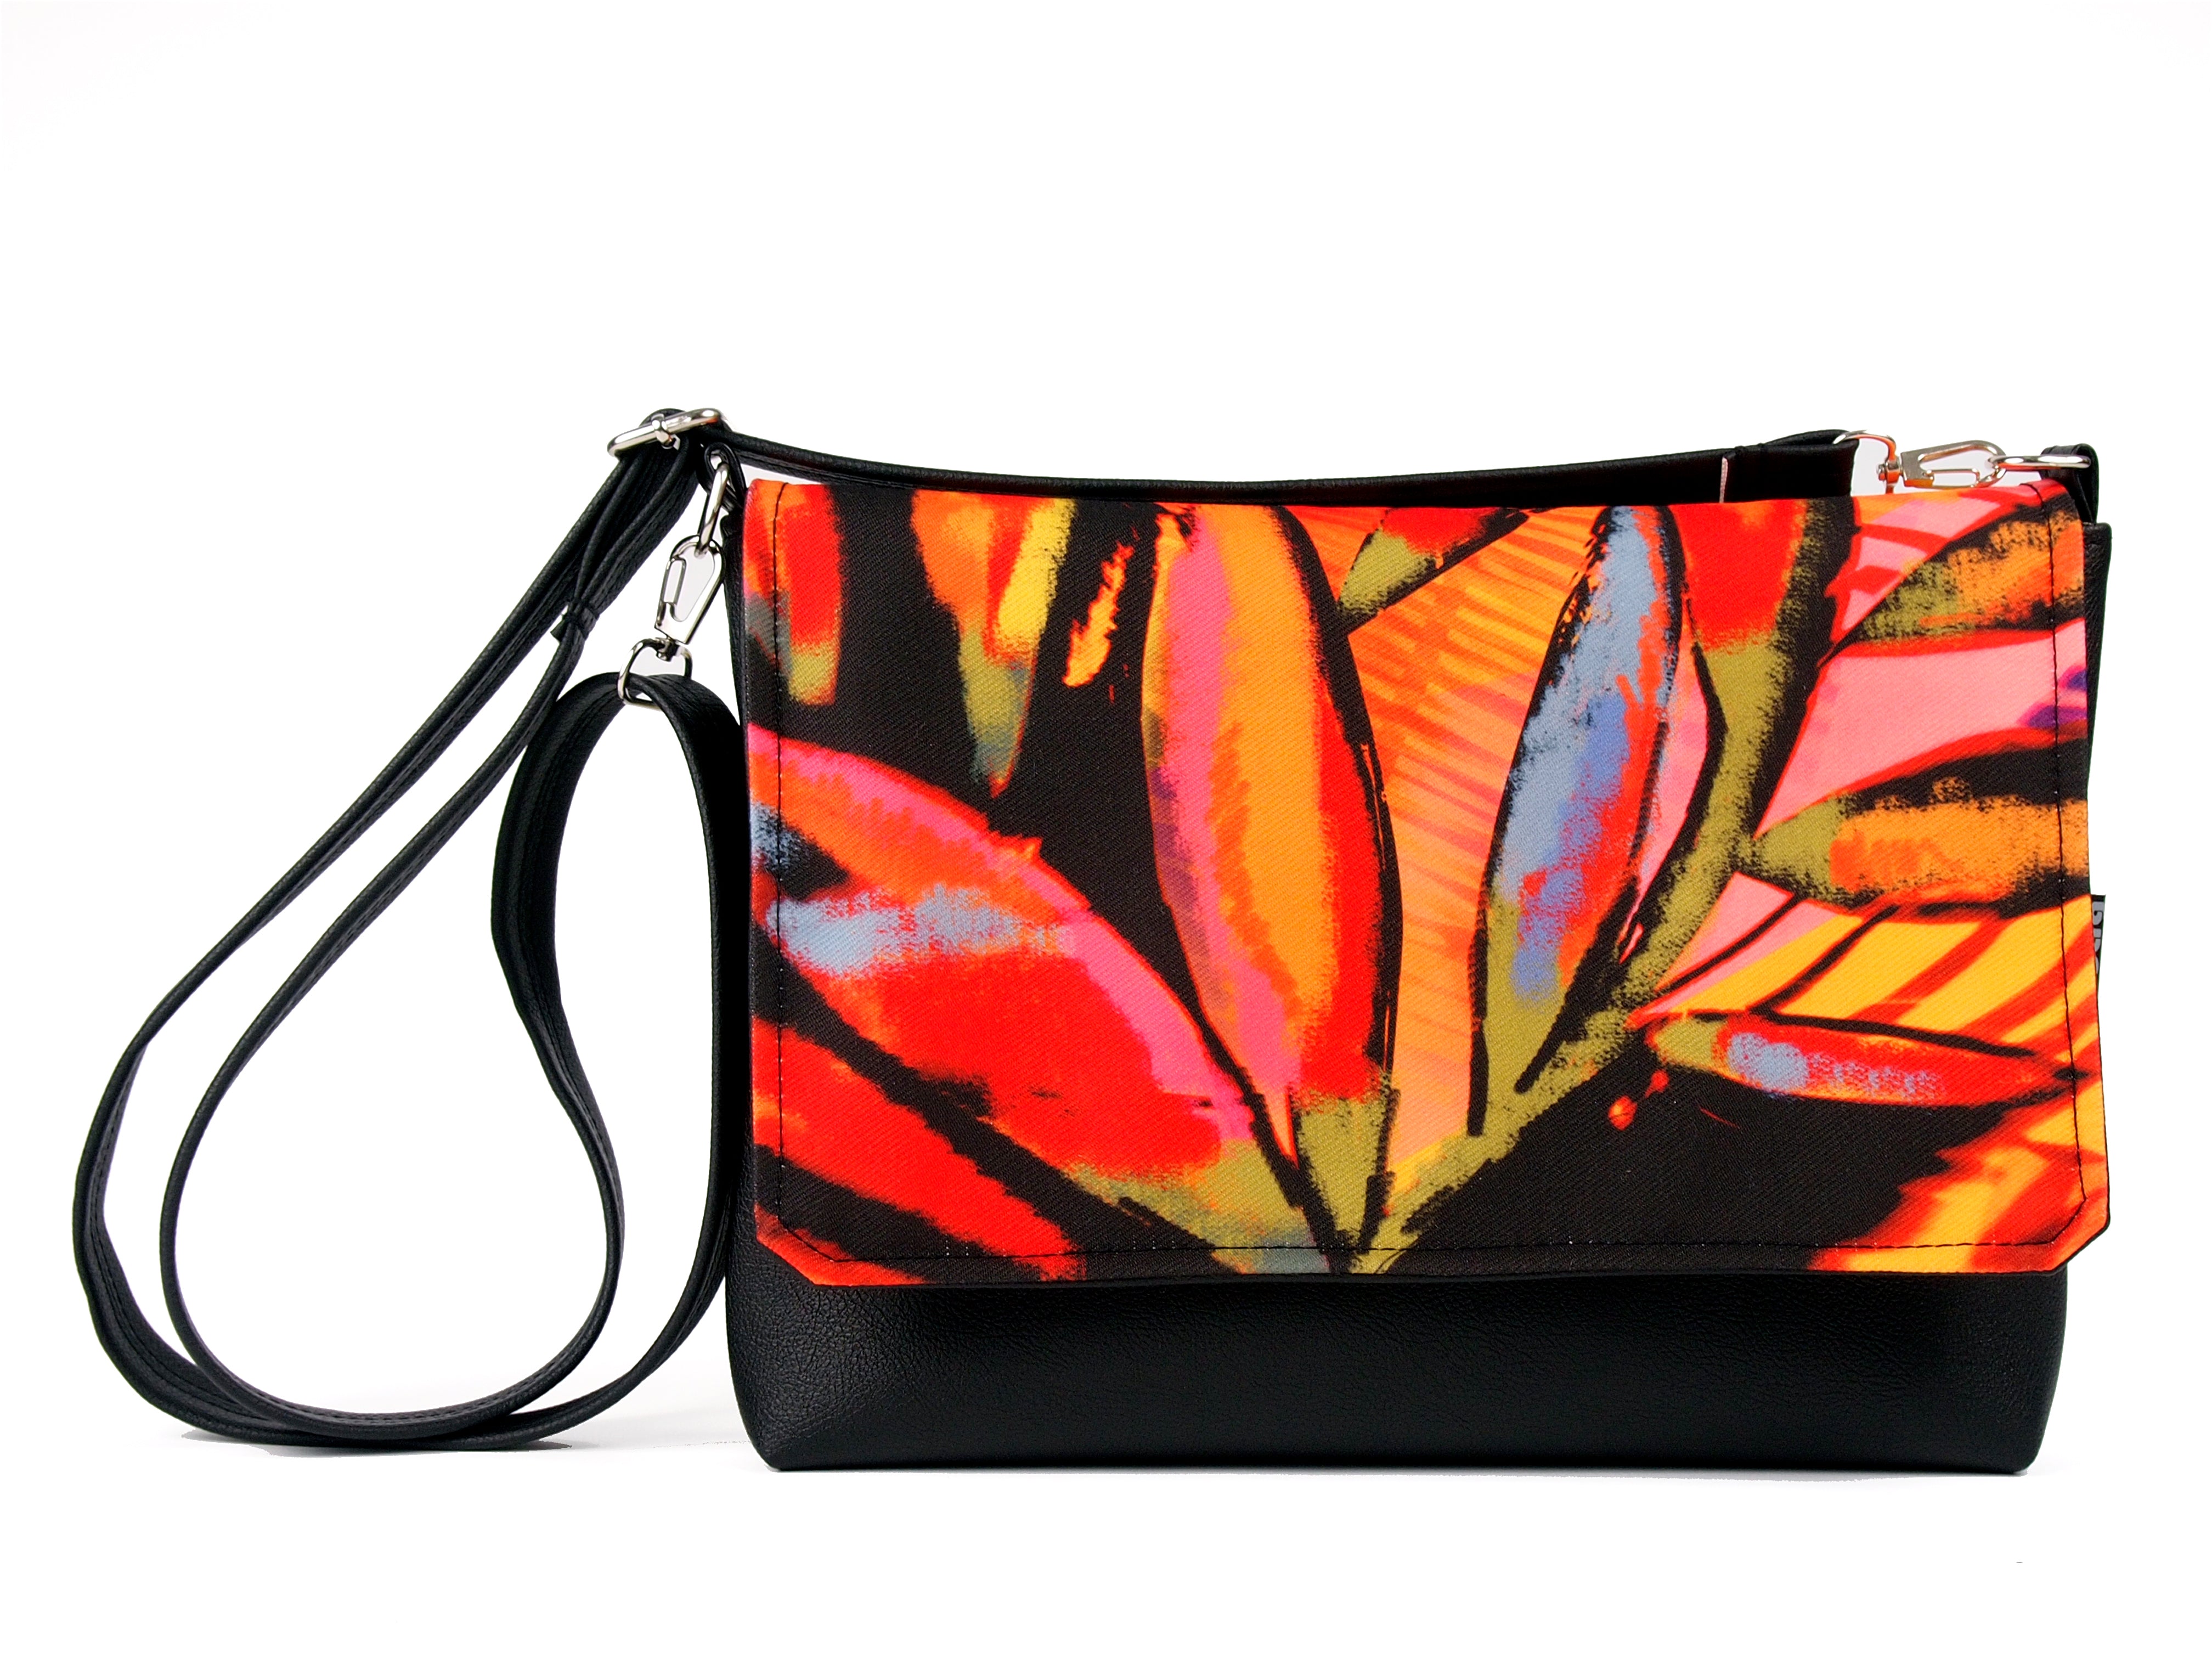 Bardo small bag - African colors - Premium Bardo small bag from BARDO ART WORKS - Just lvabstract, art bag, Art Print, autumn, black, colors, dark blue, floral, gift, graphic, green, handemade, orange, painted patterns, purple, urban style, vegan leather, white, woman, yellow55.00! Shop now at BARDO ART WORKS